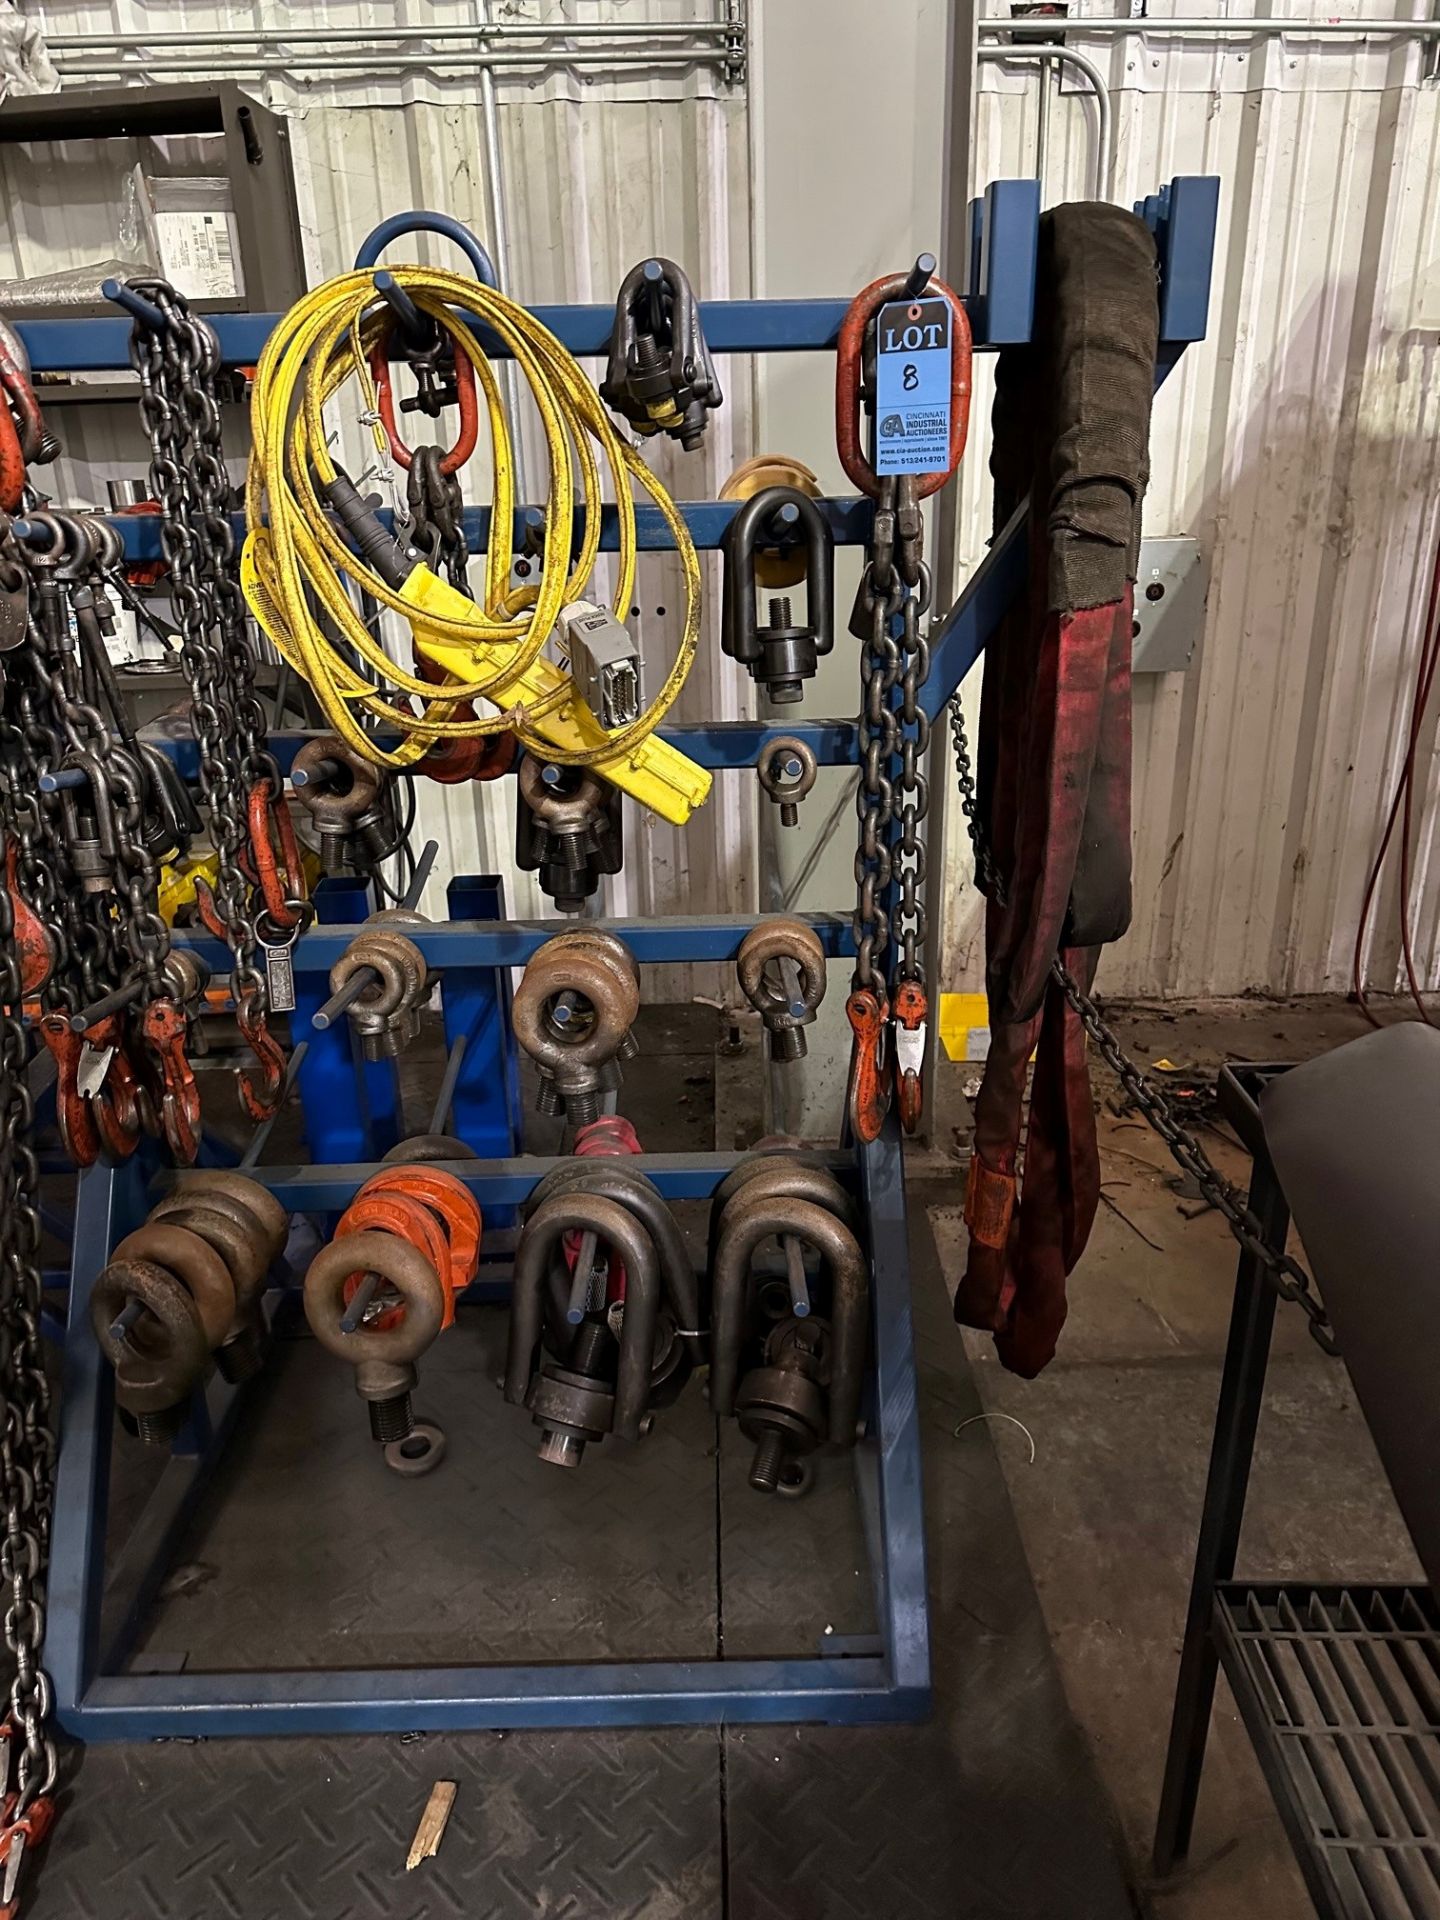 (LOT) LIFTING EQUIPMENT INCLUDING CHAINS, LIFTING EYES, SLINGS AND RELATED